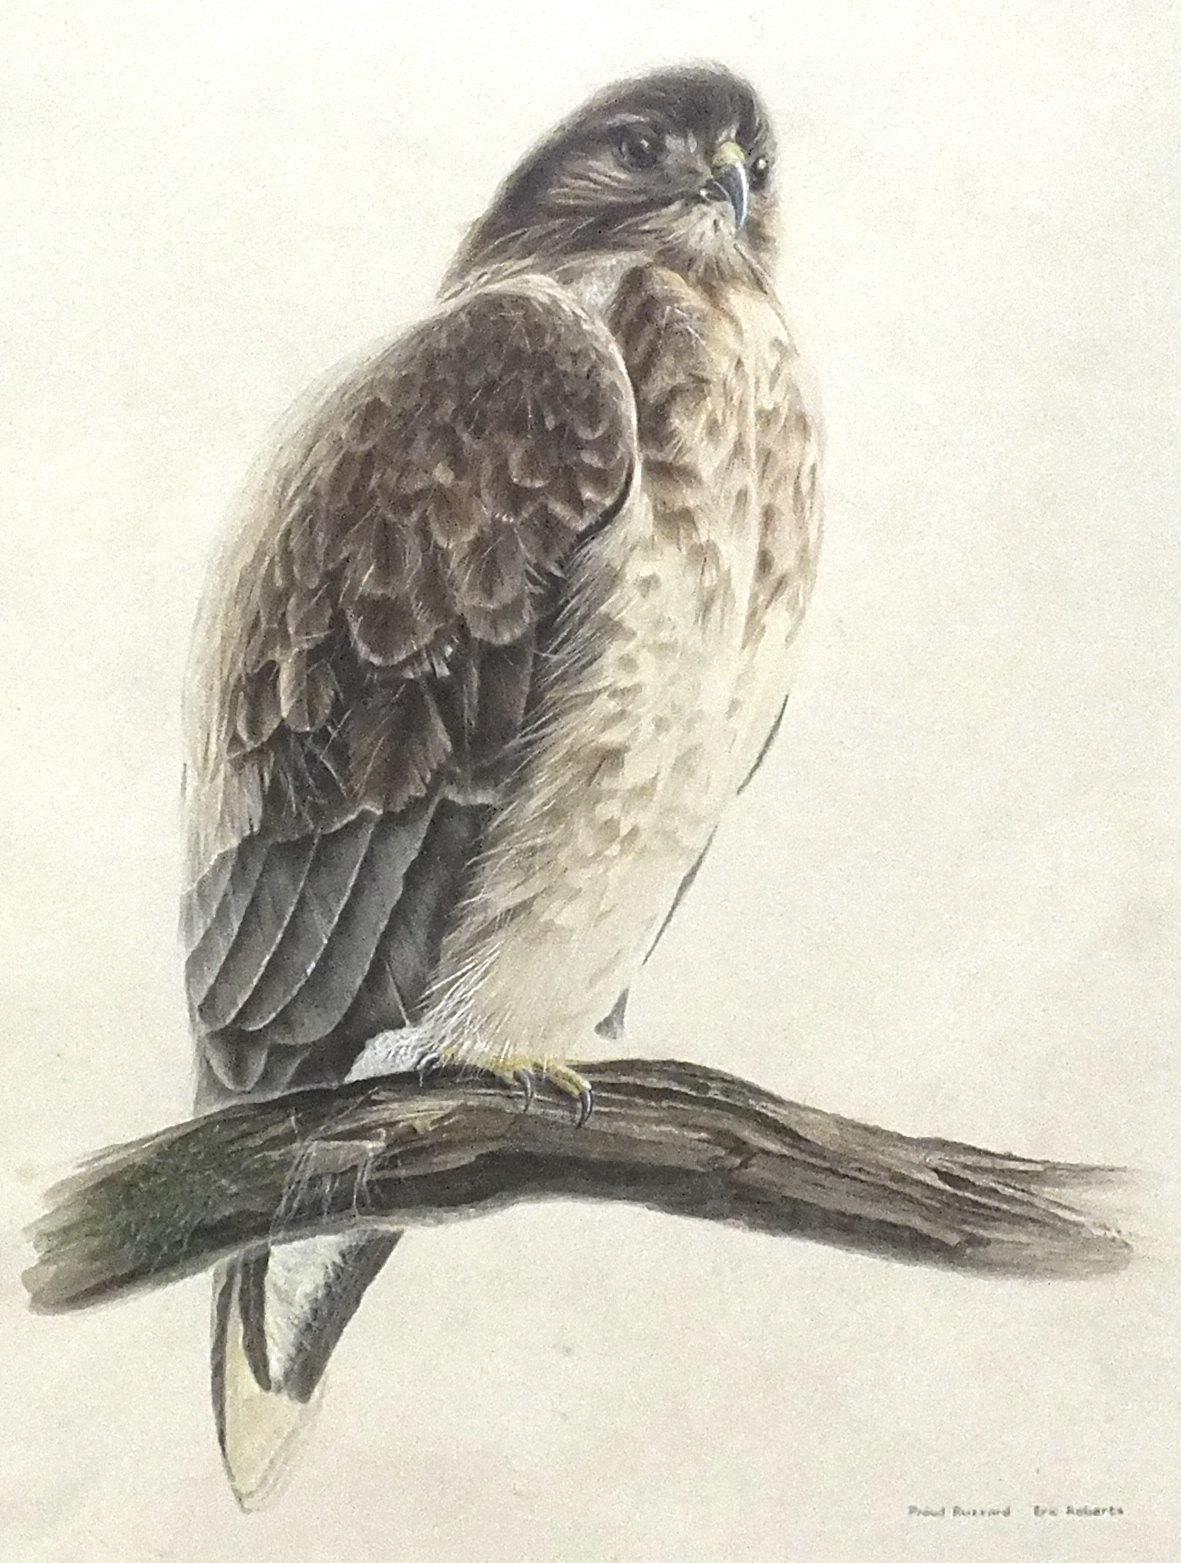 Eric Roberts PROUD BUZZARD Watercolour, signed and titled, 48.5 x 35.5cm. - Image 2 of 2